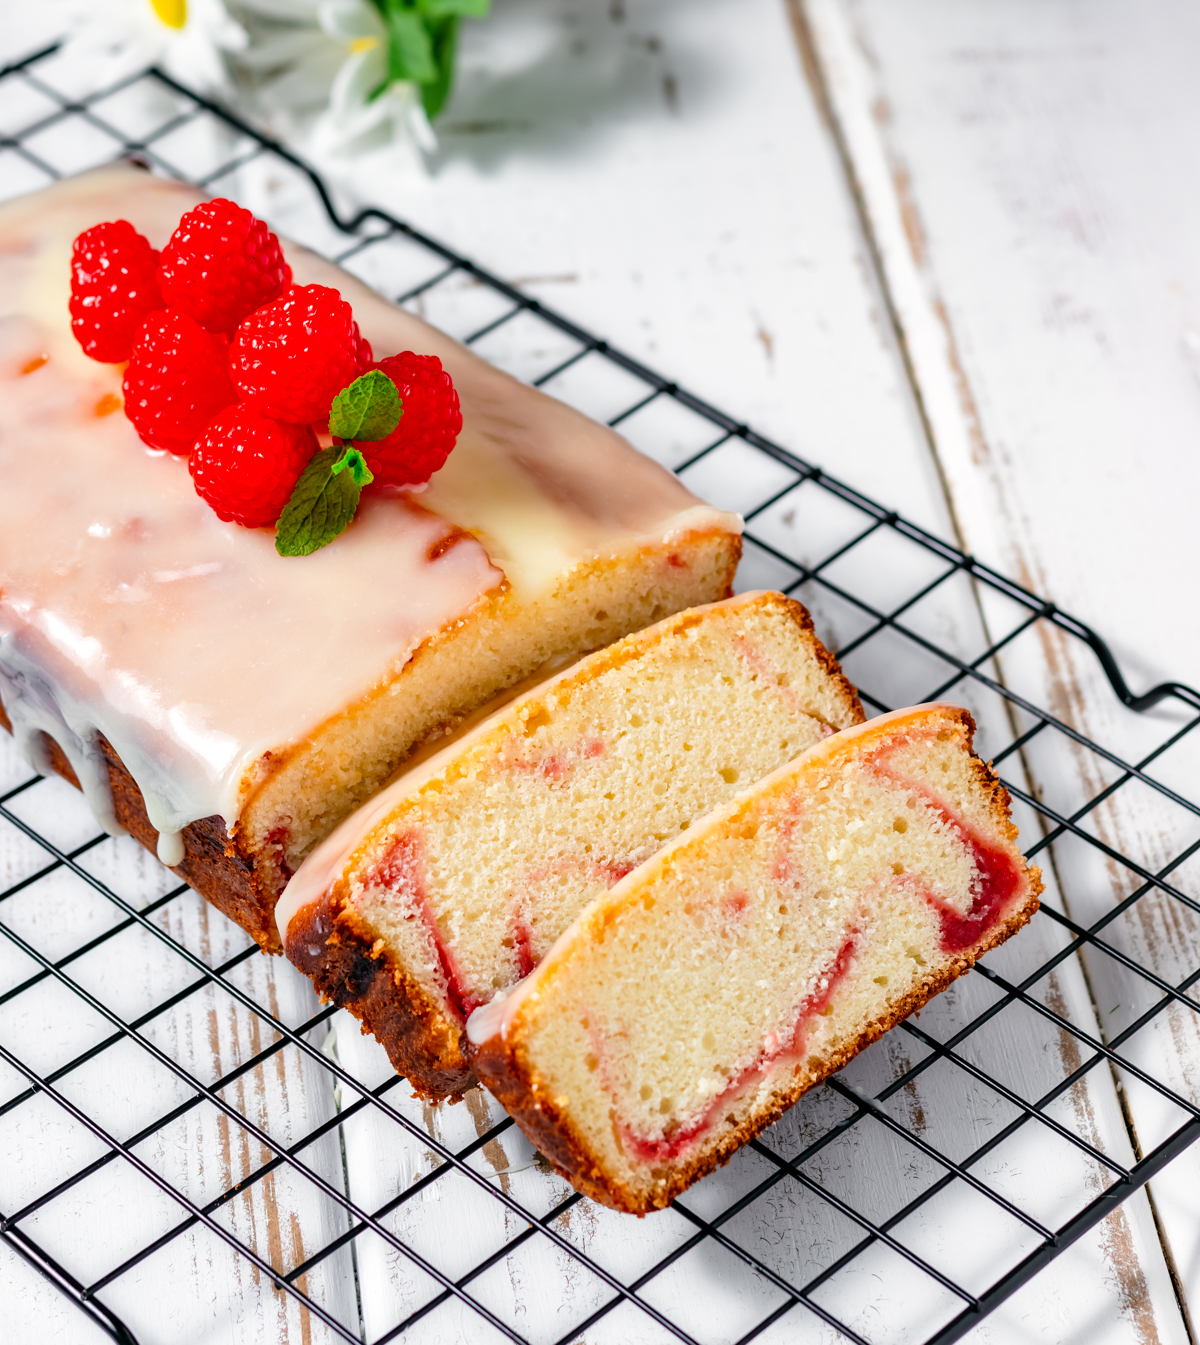 White Chocolate and Raspberry Loaf Cake on White Wood Table